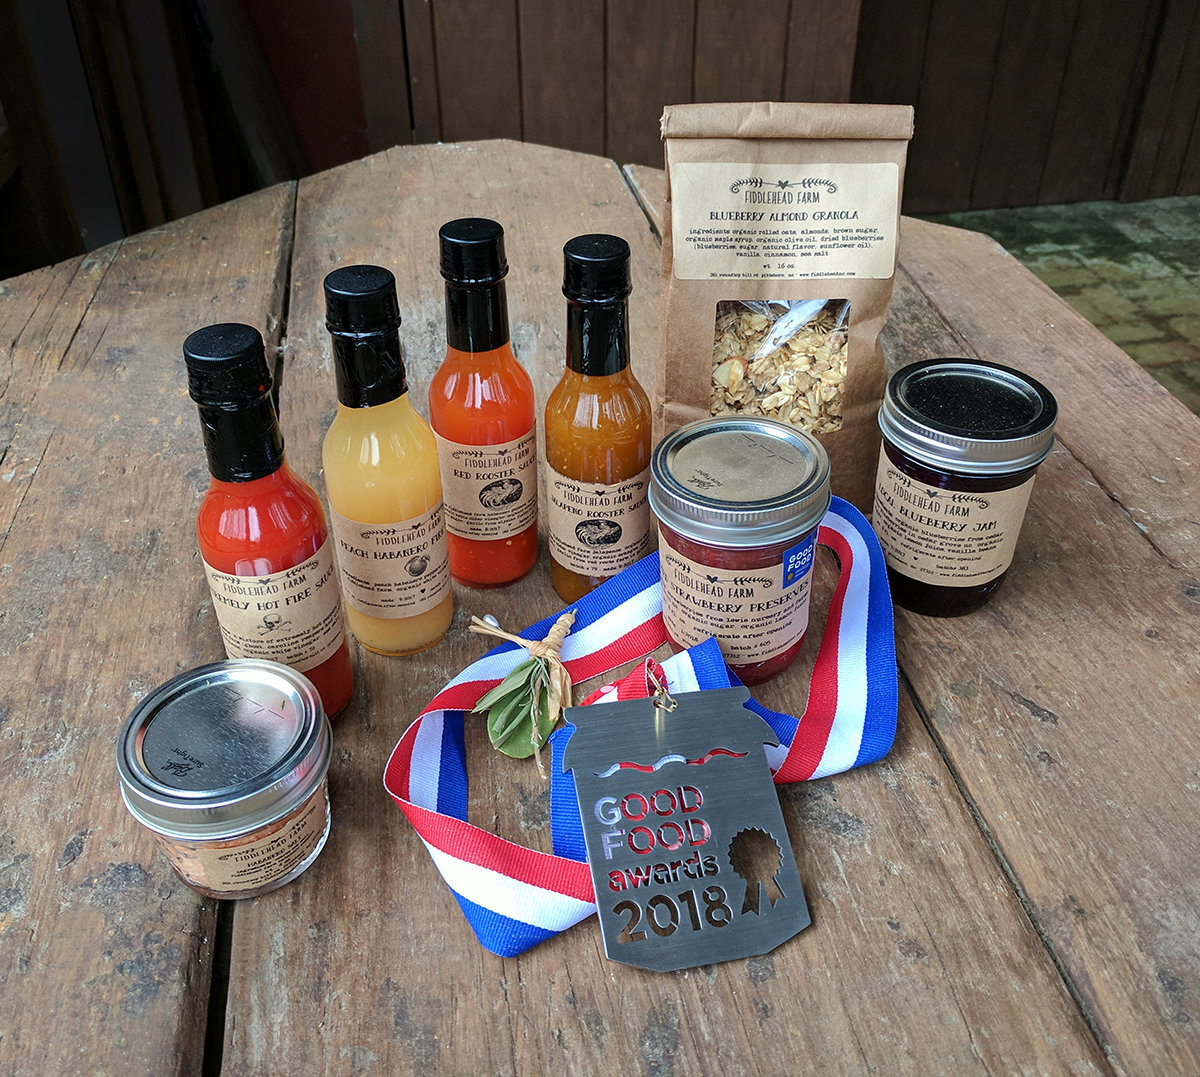 Emily Boynton of Fiddlehead Farm won a Good Food Award for her roasted strawberry preserves, shown here with a few of the other 60 products she makes. 